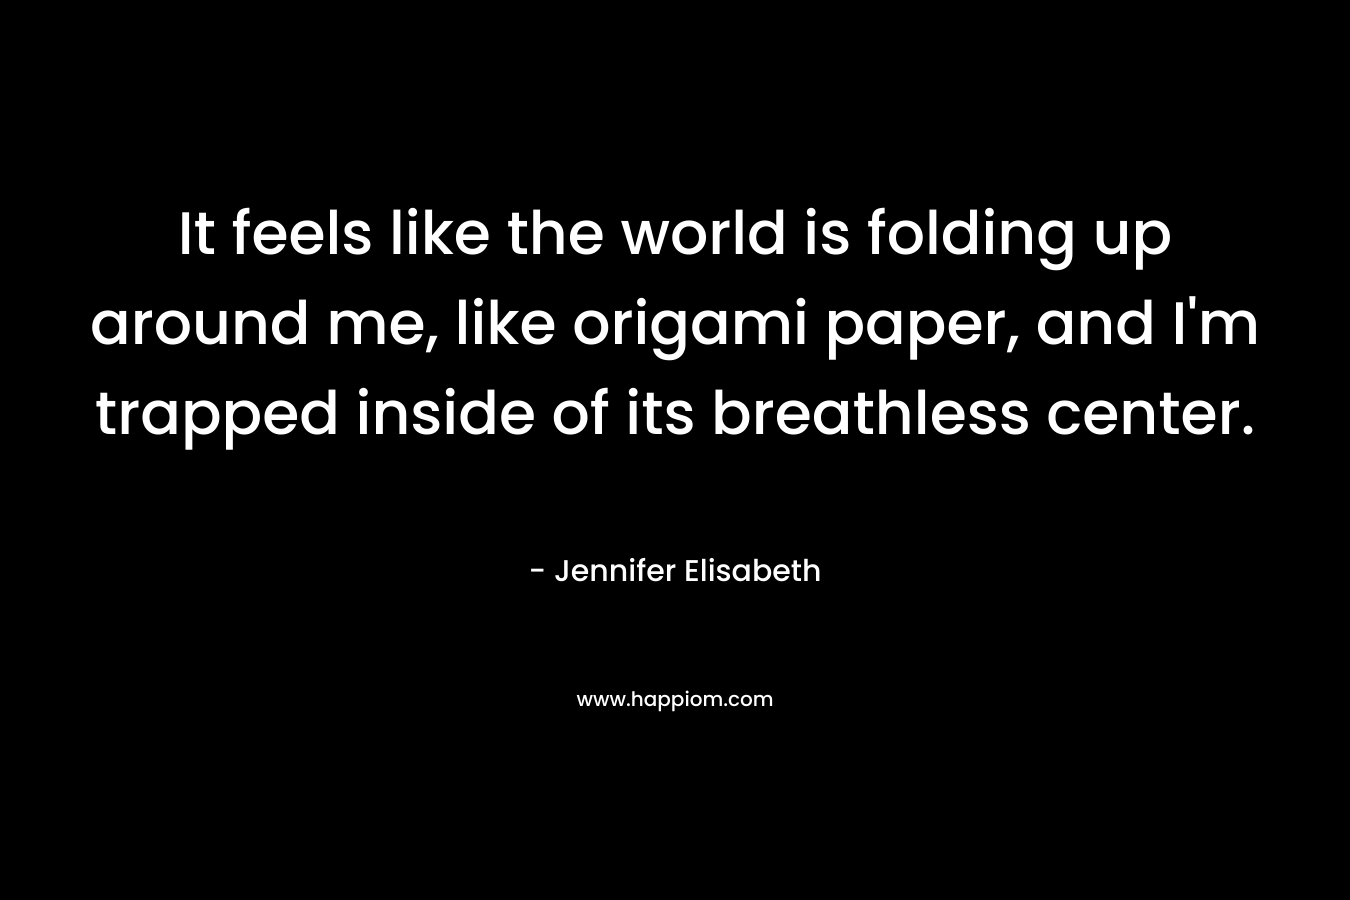 It feels like the world is folding up around me, like origami paper, and I’m trapped inside of its breathless center. – Jennifer Elisabeth